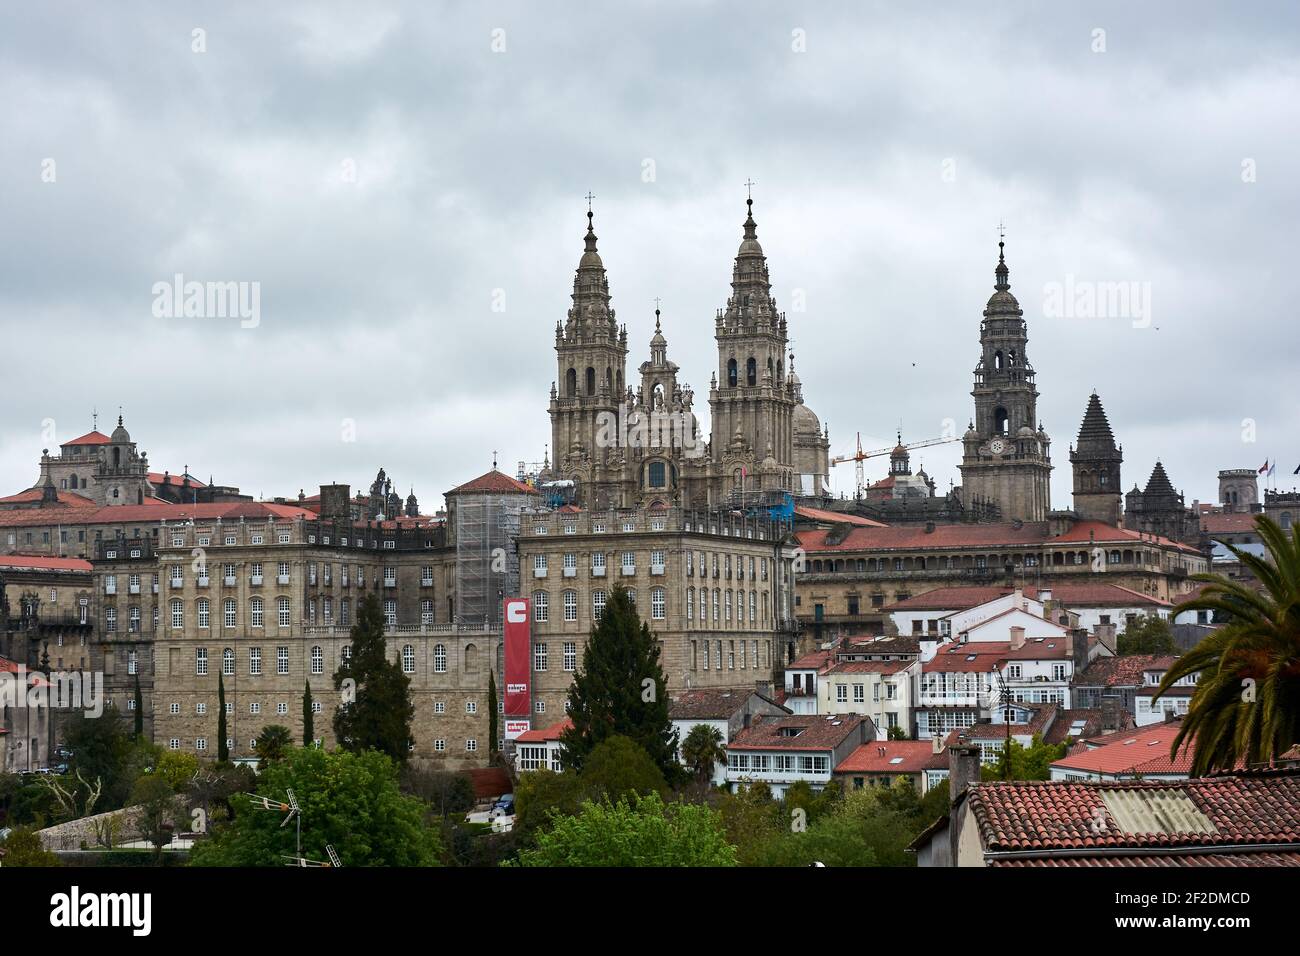 MAY 2, 2018 - GALICIA, SPAIN: View of the city and Cathedral of Santiago de Compostela (Cathedral of Saint James) from the Alameda Park. Horizontal sh Stock Photo